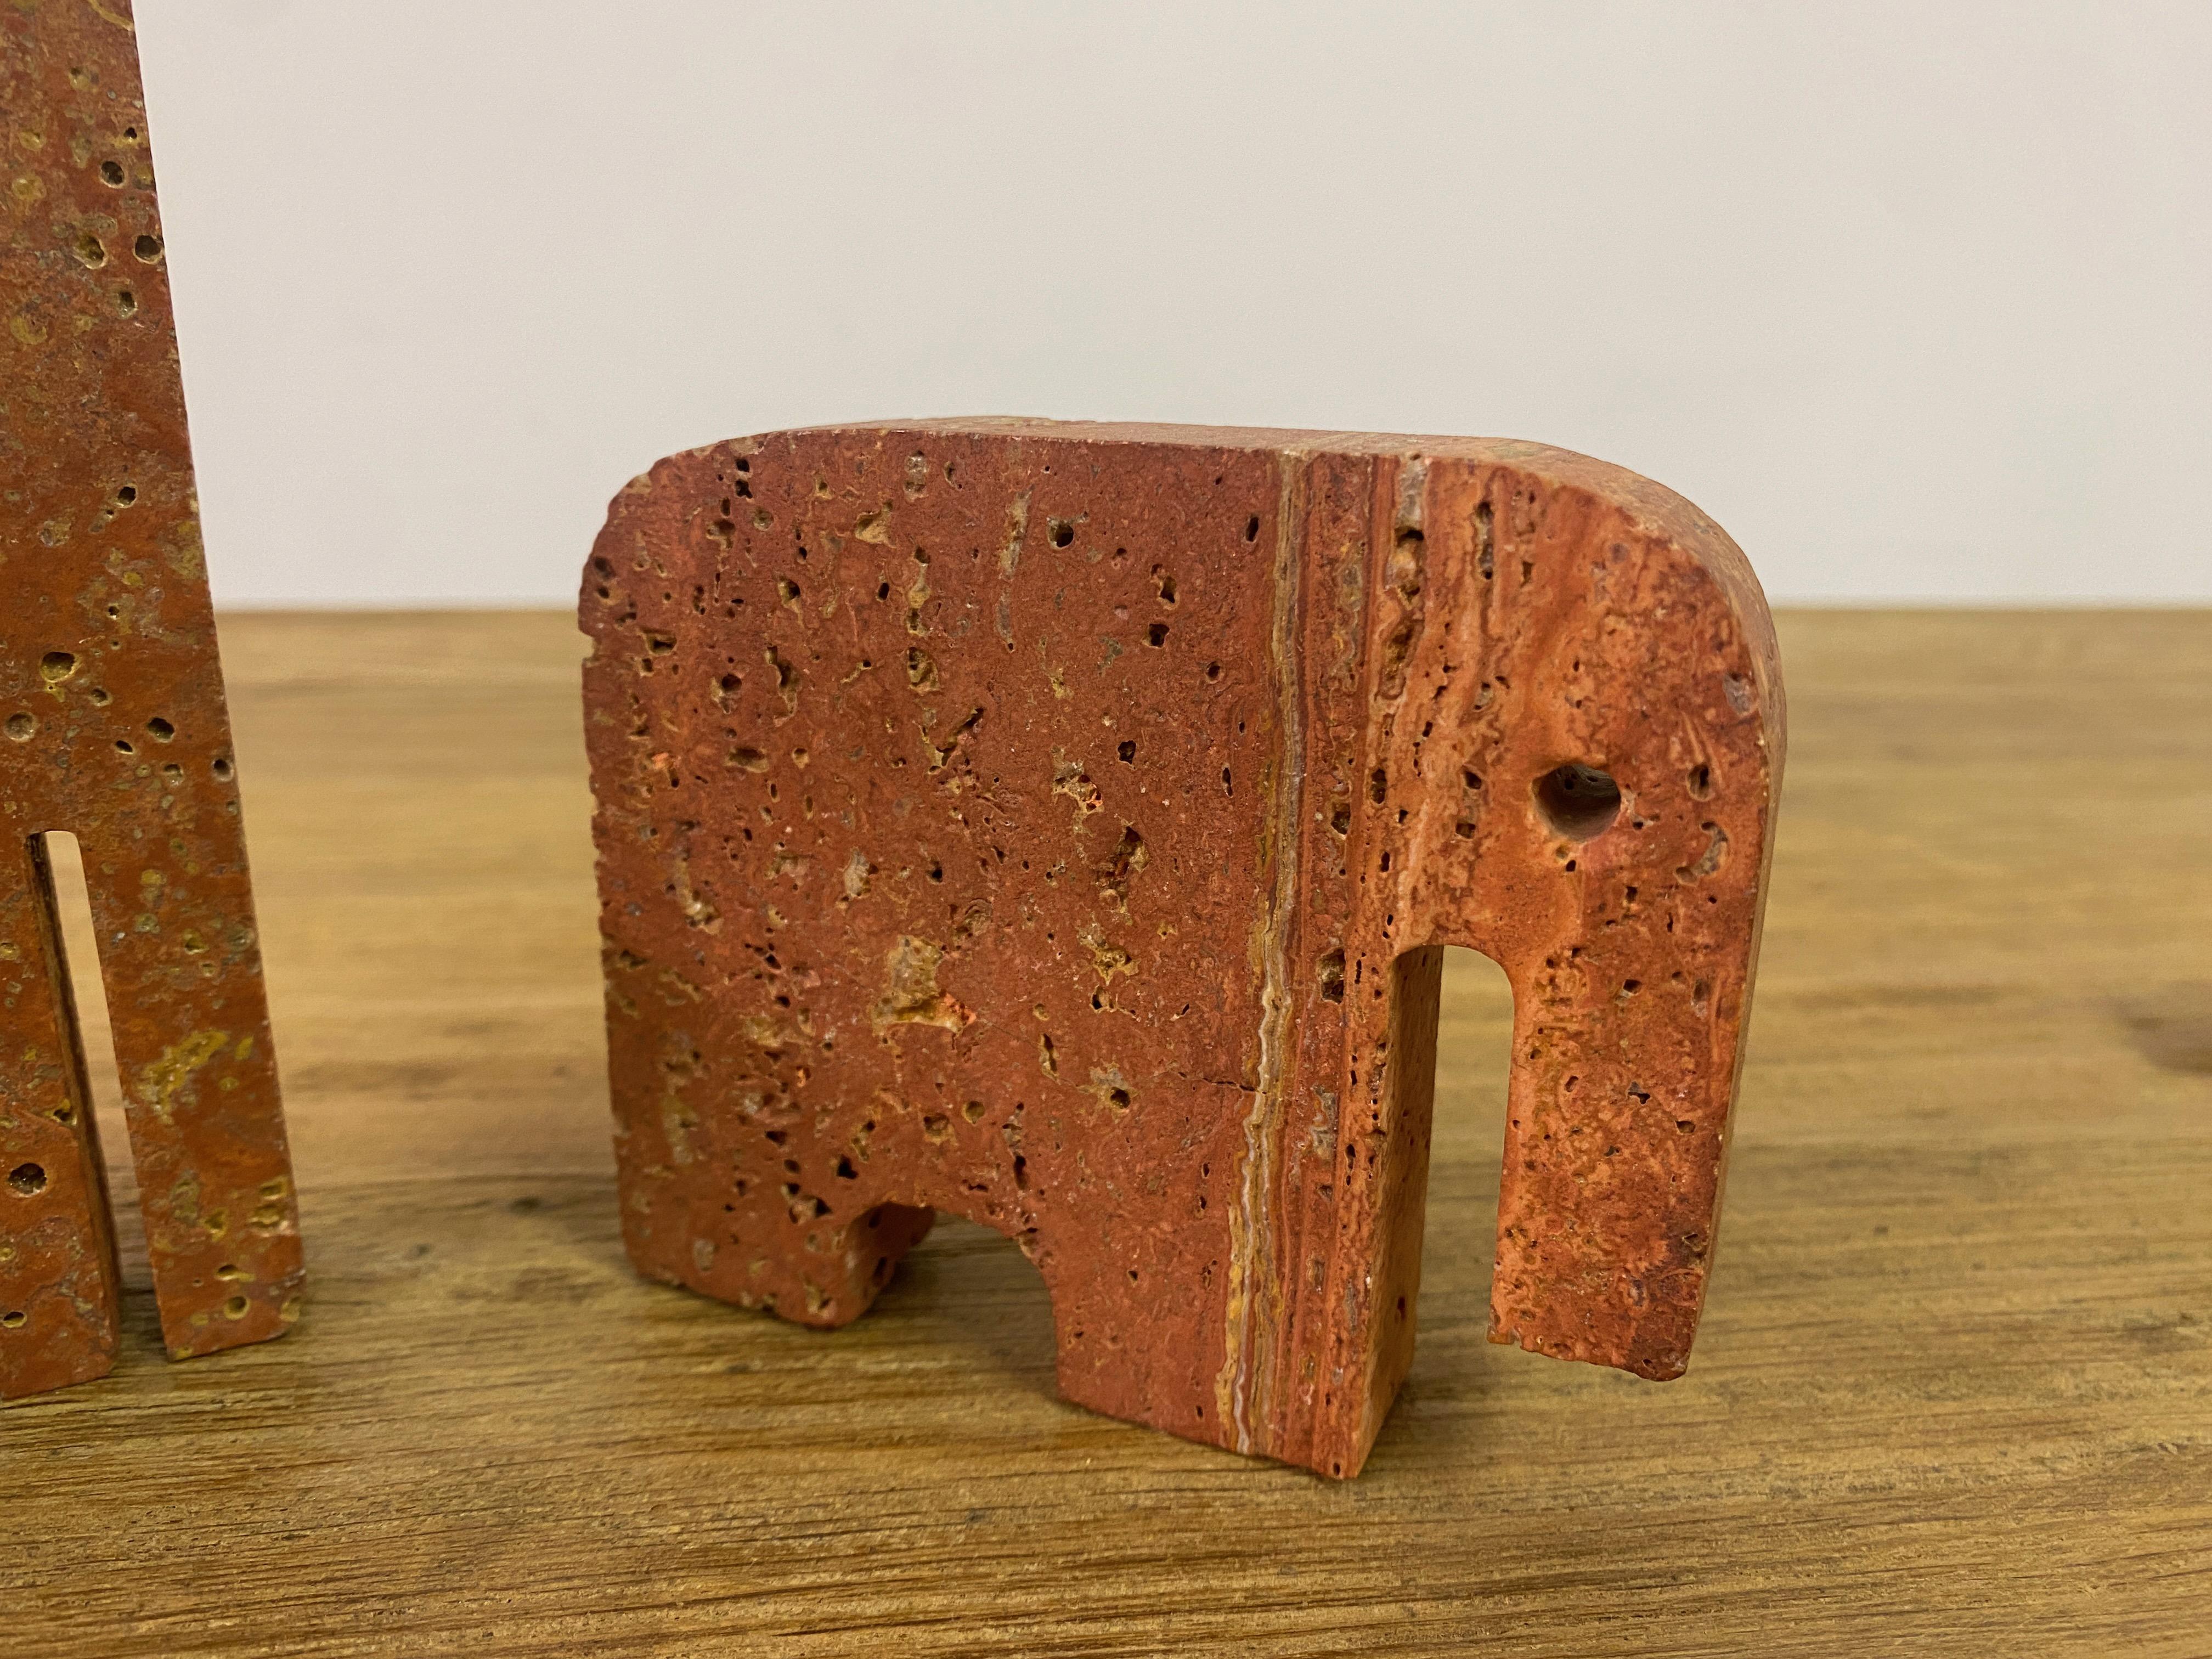 20th Century Pair Of Red Travertine Elephant Bookends And A Giraffe For Sale